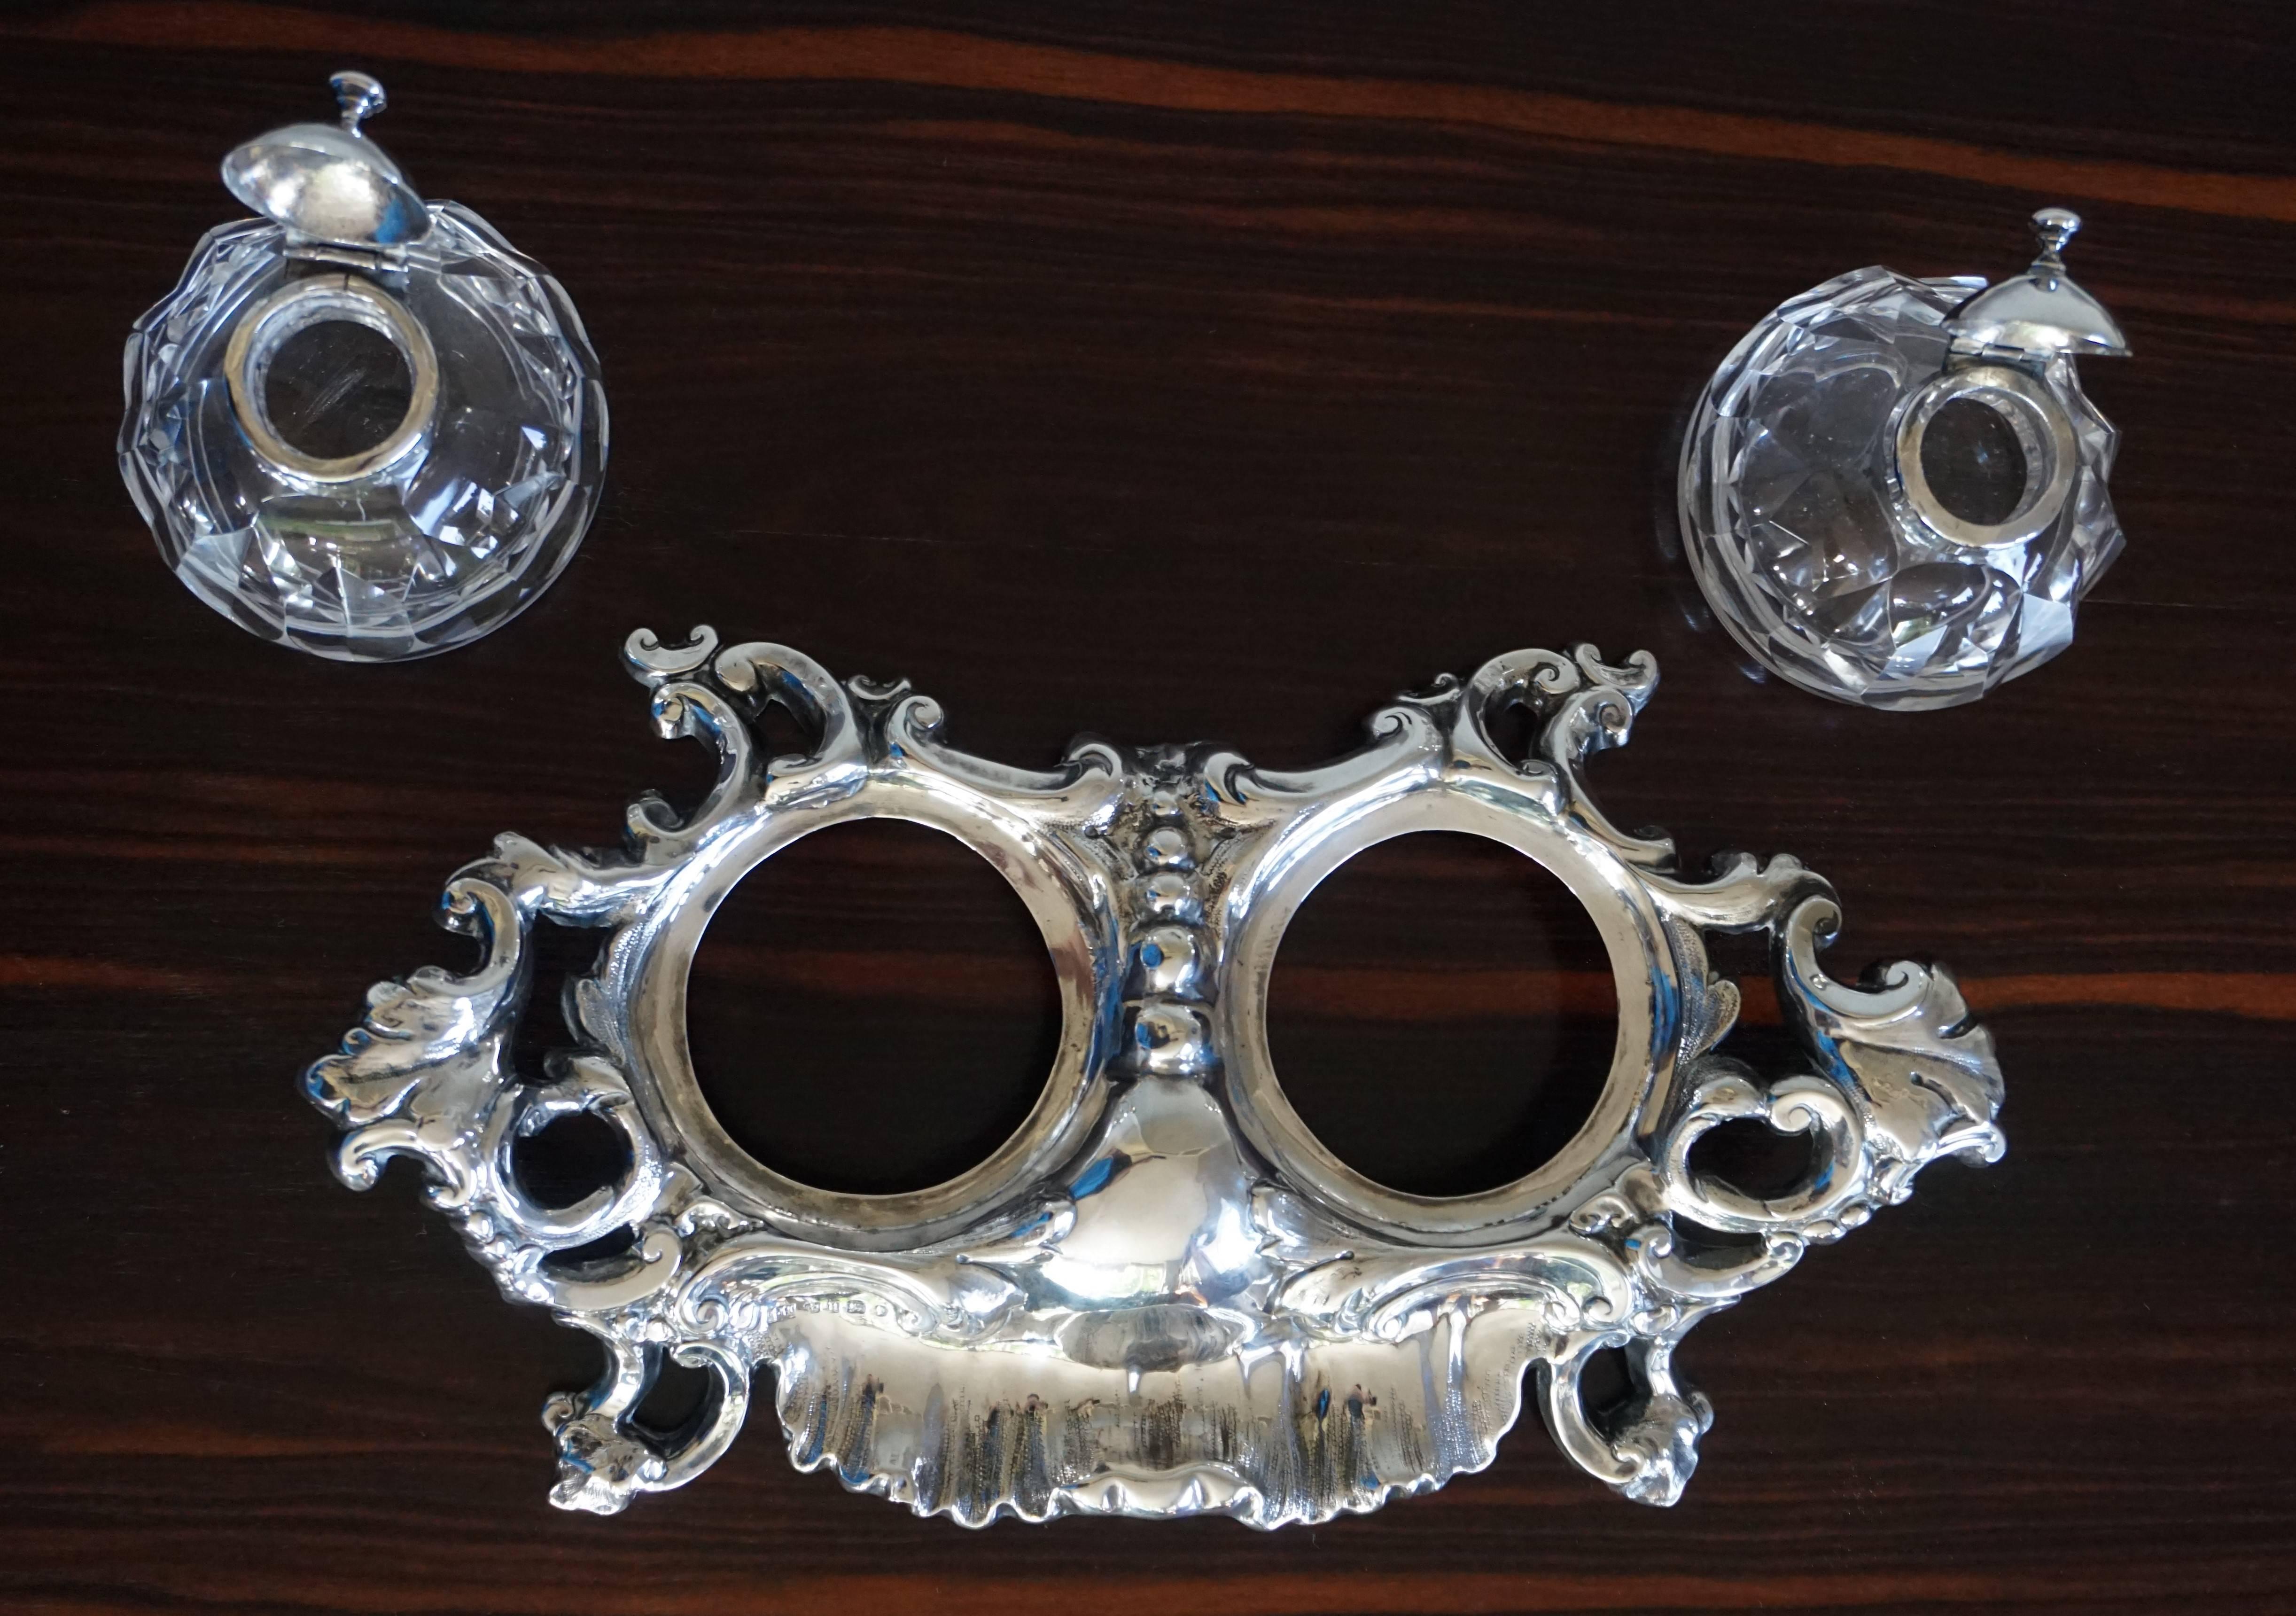 English Antique Sterling Silver Rococo Style Inkstand with Crystal Glass Inkwells, 1859